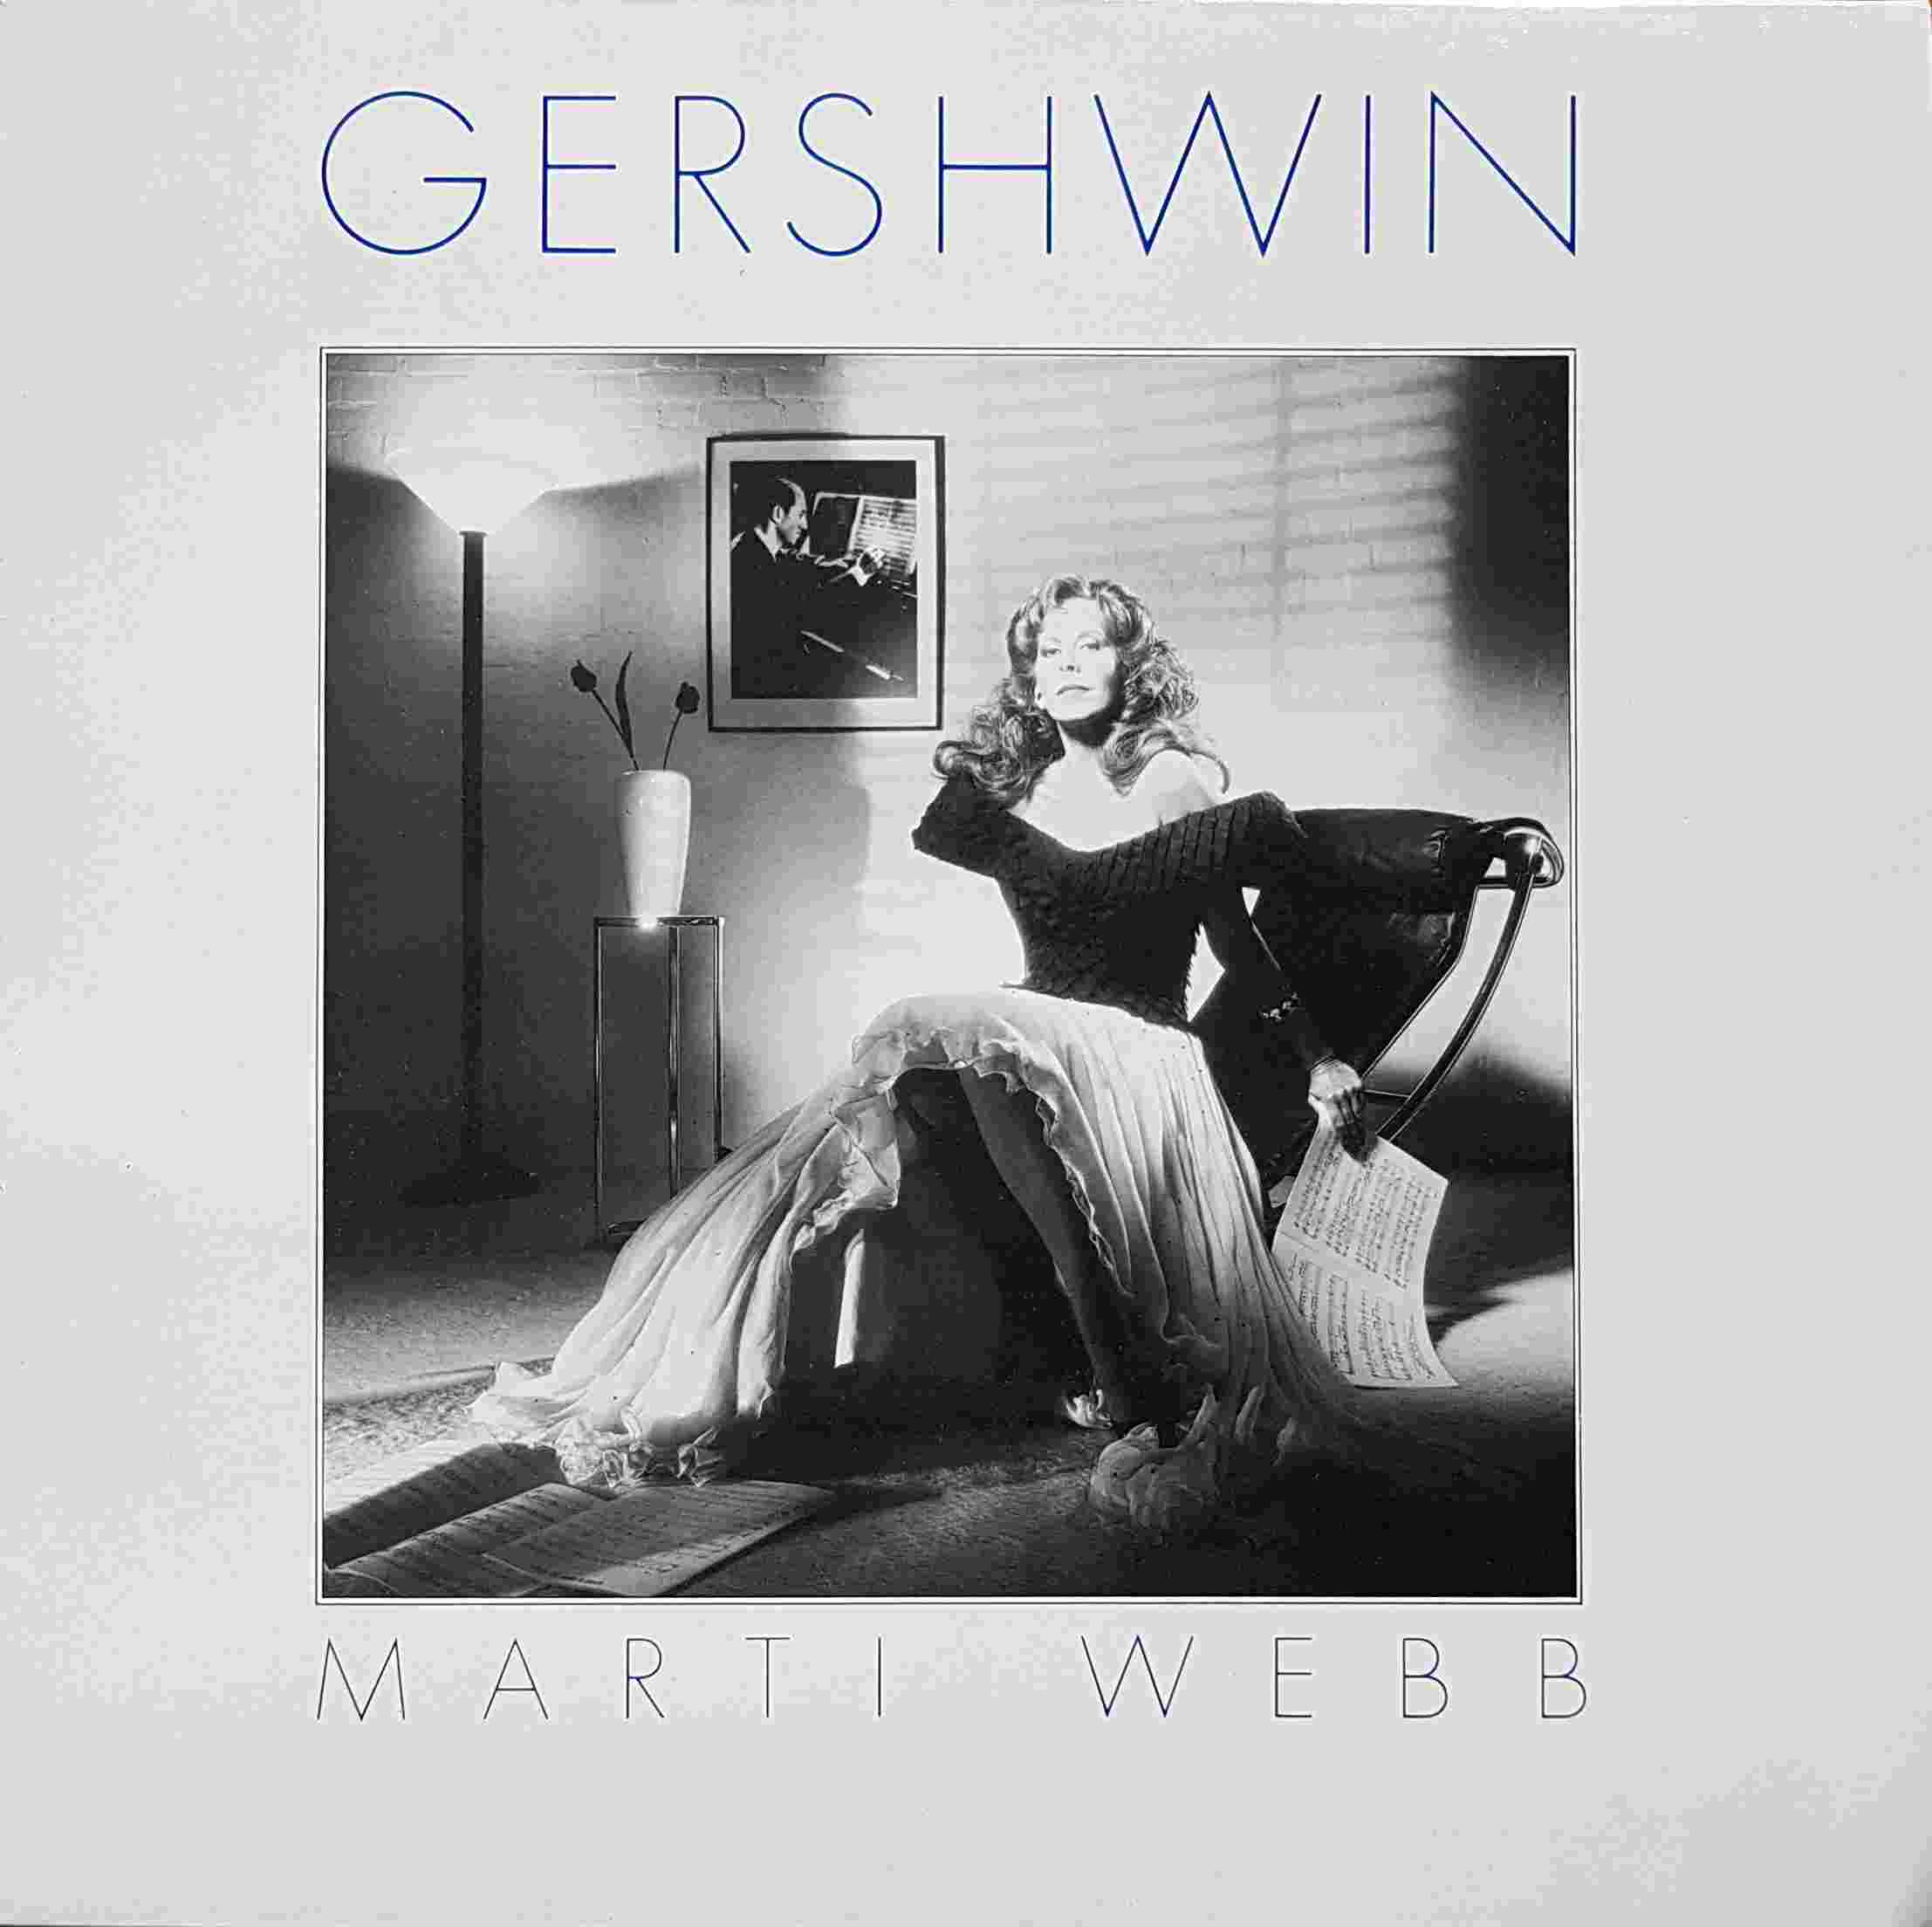 Picture of REB 640 Gershwin - Marti Webb by artist Marti Webb from the BBC albums - Records and Tapes library